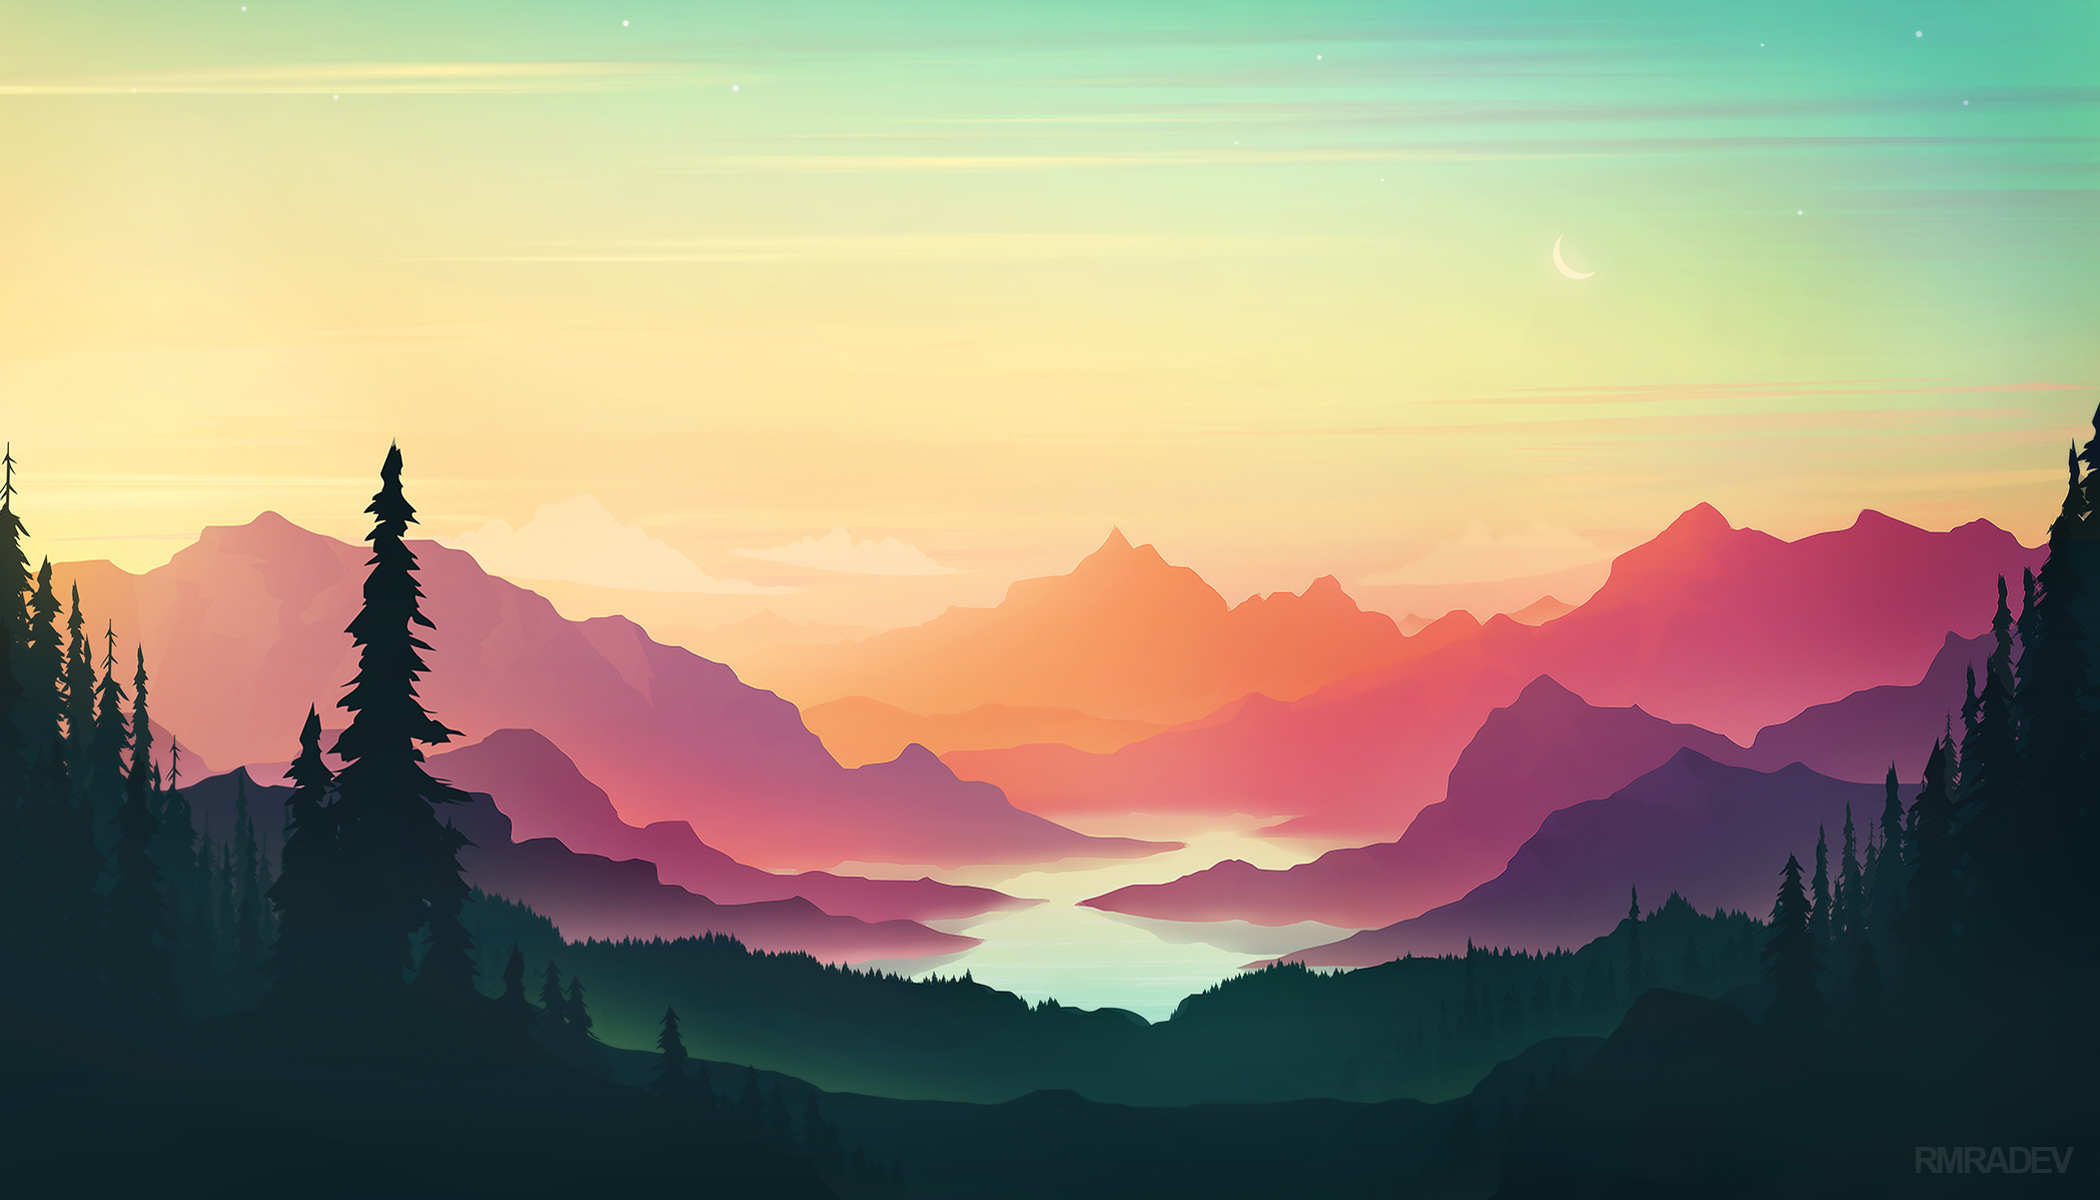 Digital Painting Sunset Mountains Forest River RmRadev 2100x1200